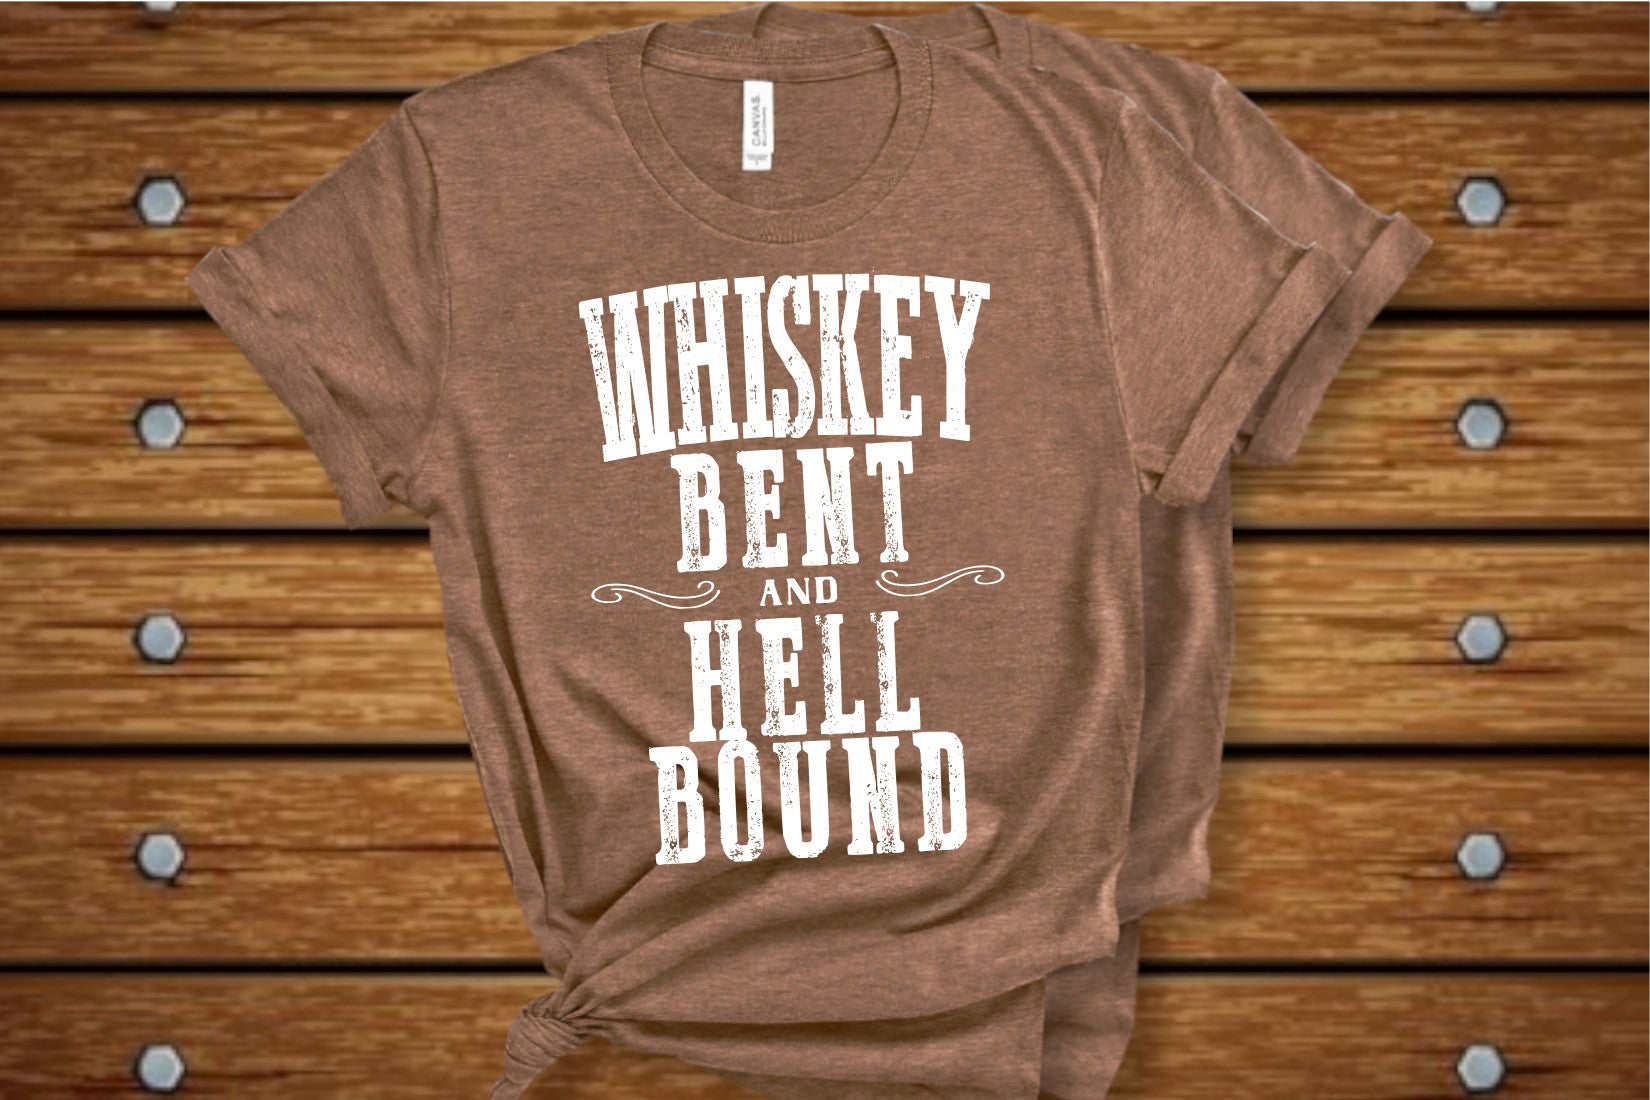 Whiskey Bent and Hell Bound (White Ink) - RAJE 